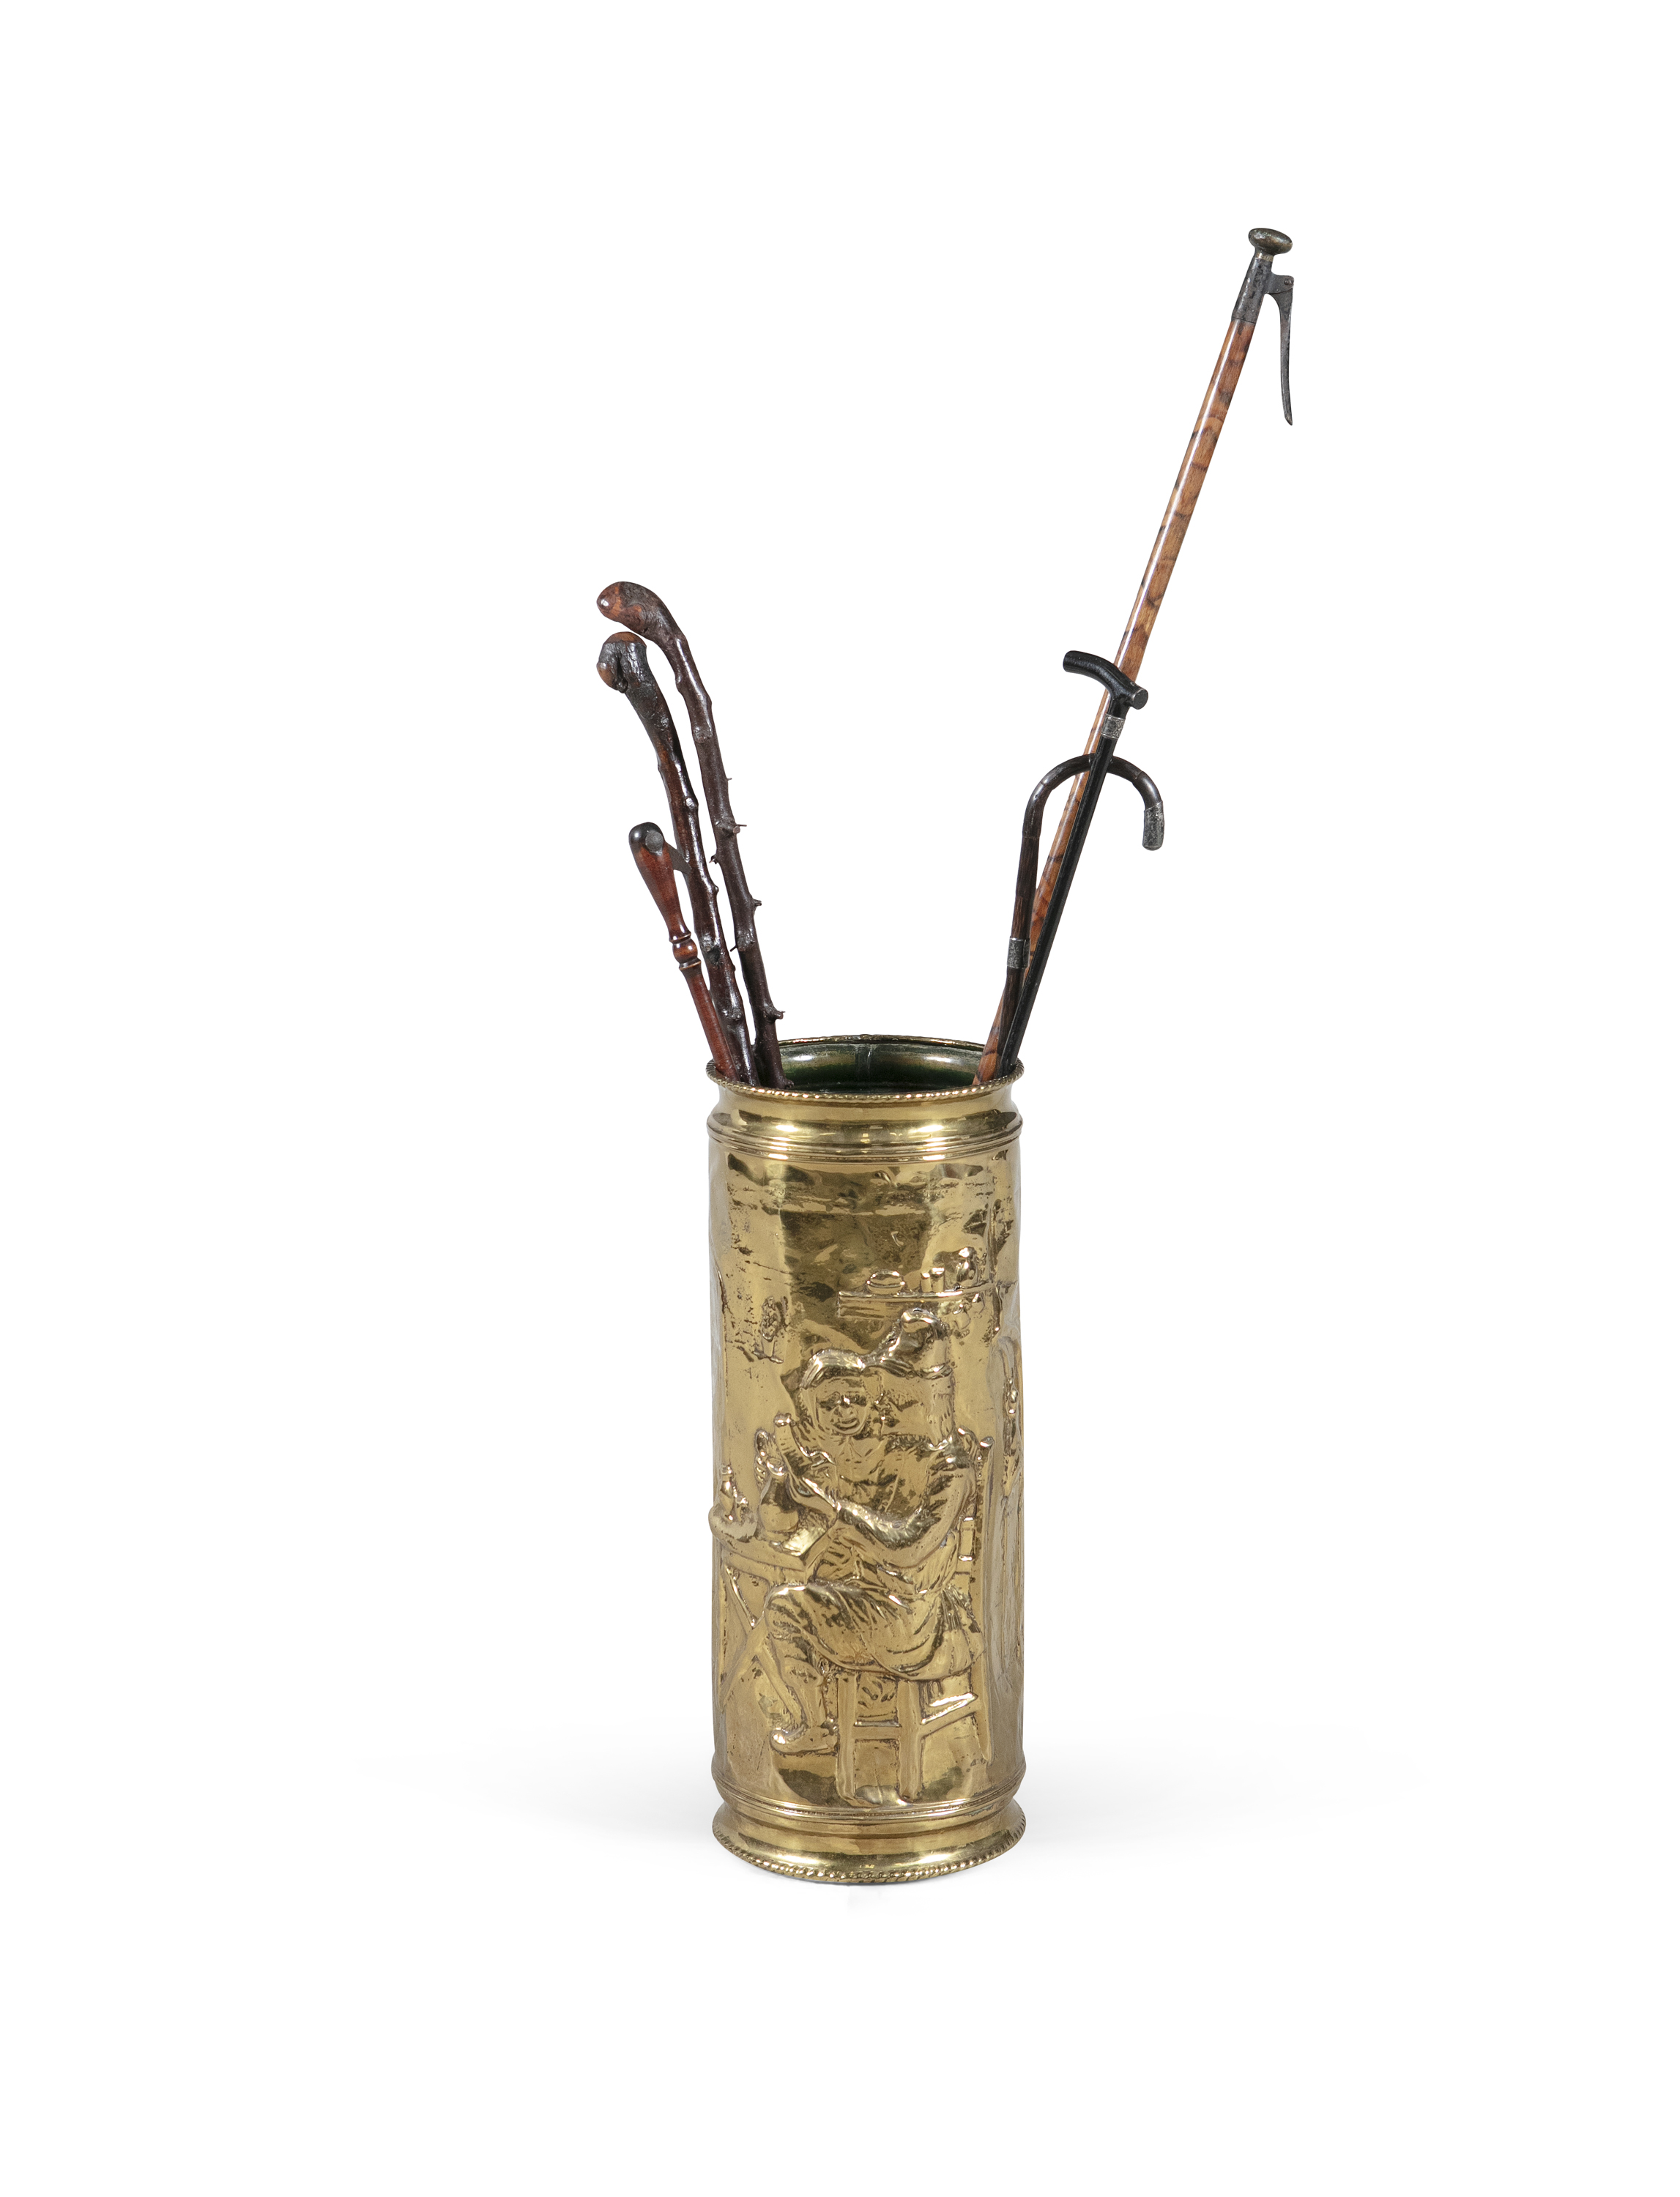 A BRASS CYLINDRICAL STICK STAND, with embossed figural decoration, in the manner of David Teniers. - Image 3 of 3